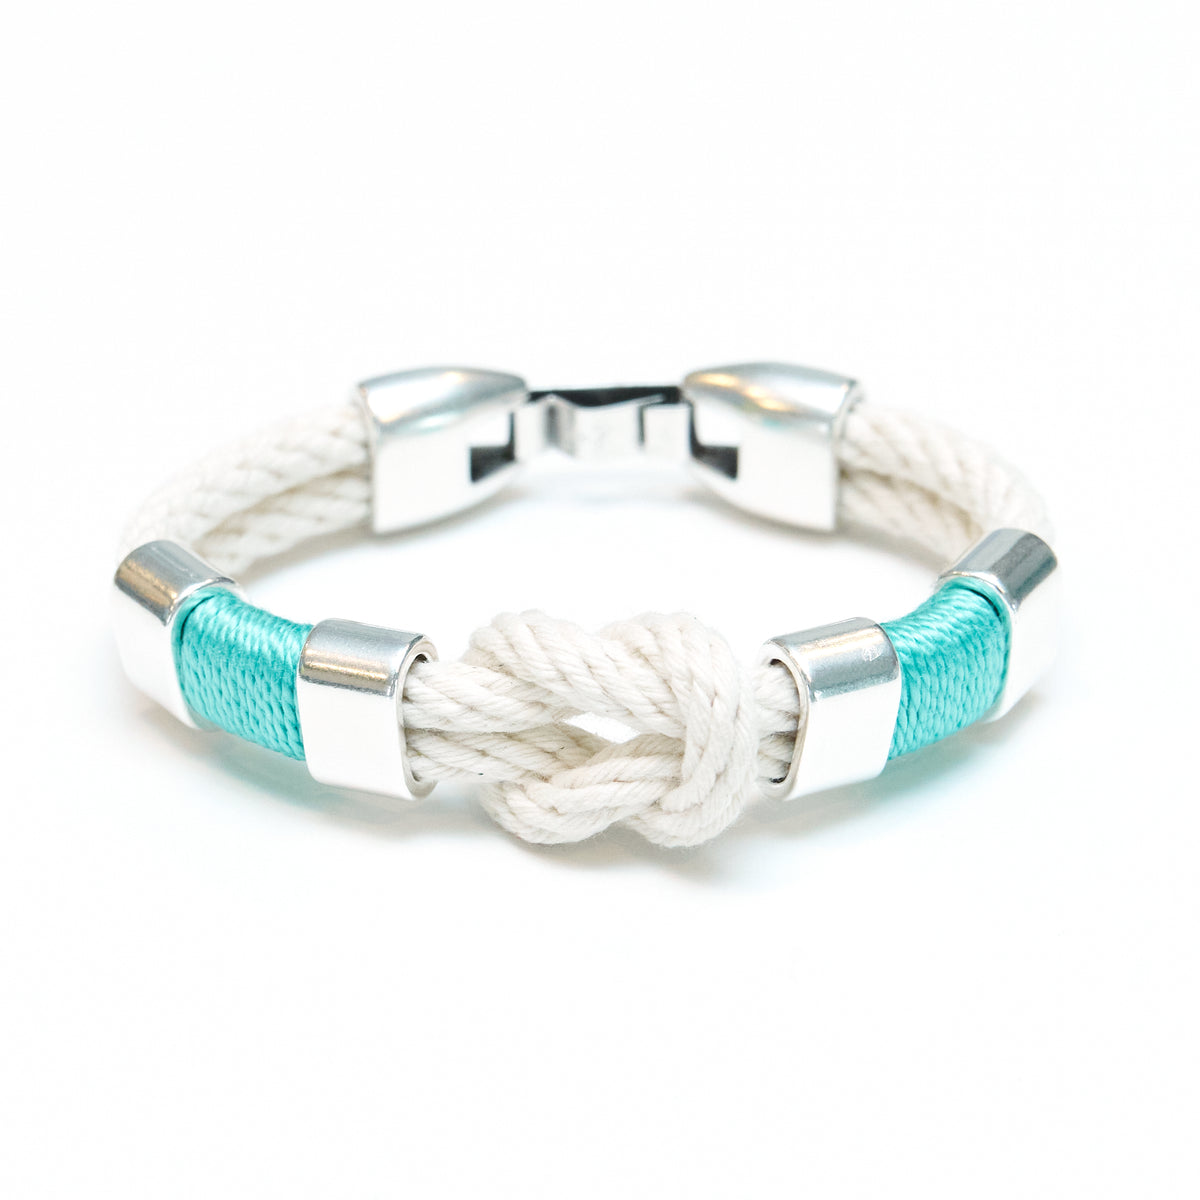 Starboard - Ivory/Turquoise/Silver